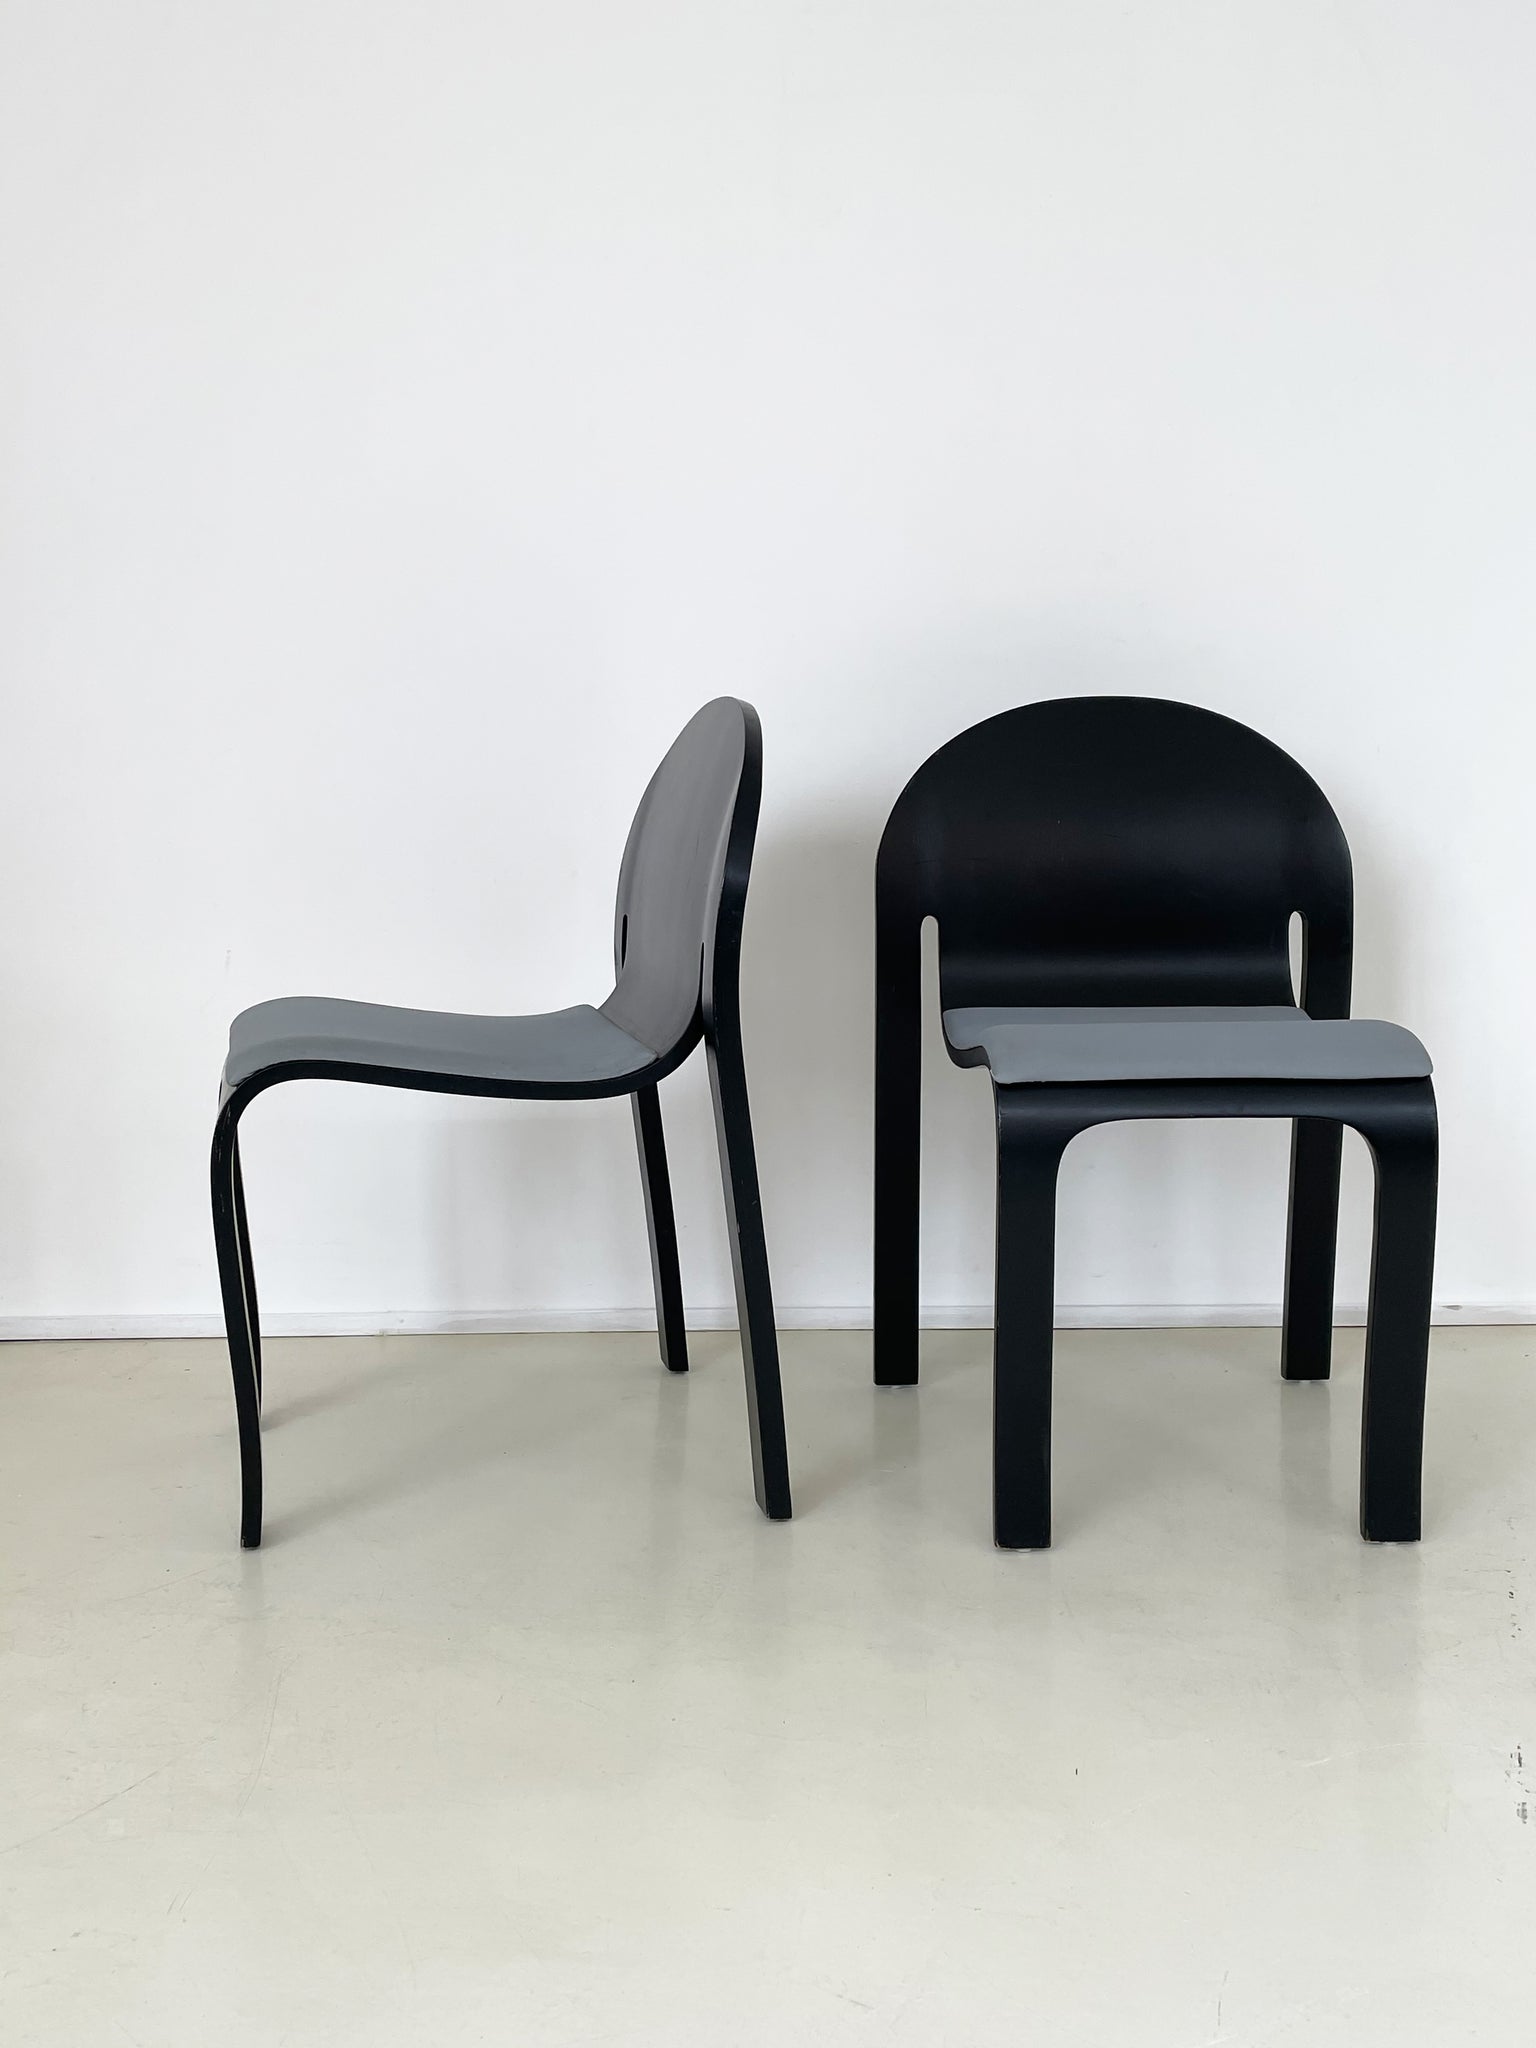 Peter Danko Bentwood "Body Form" Dining Chair